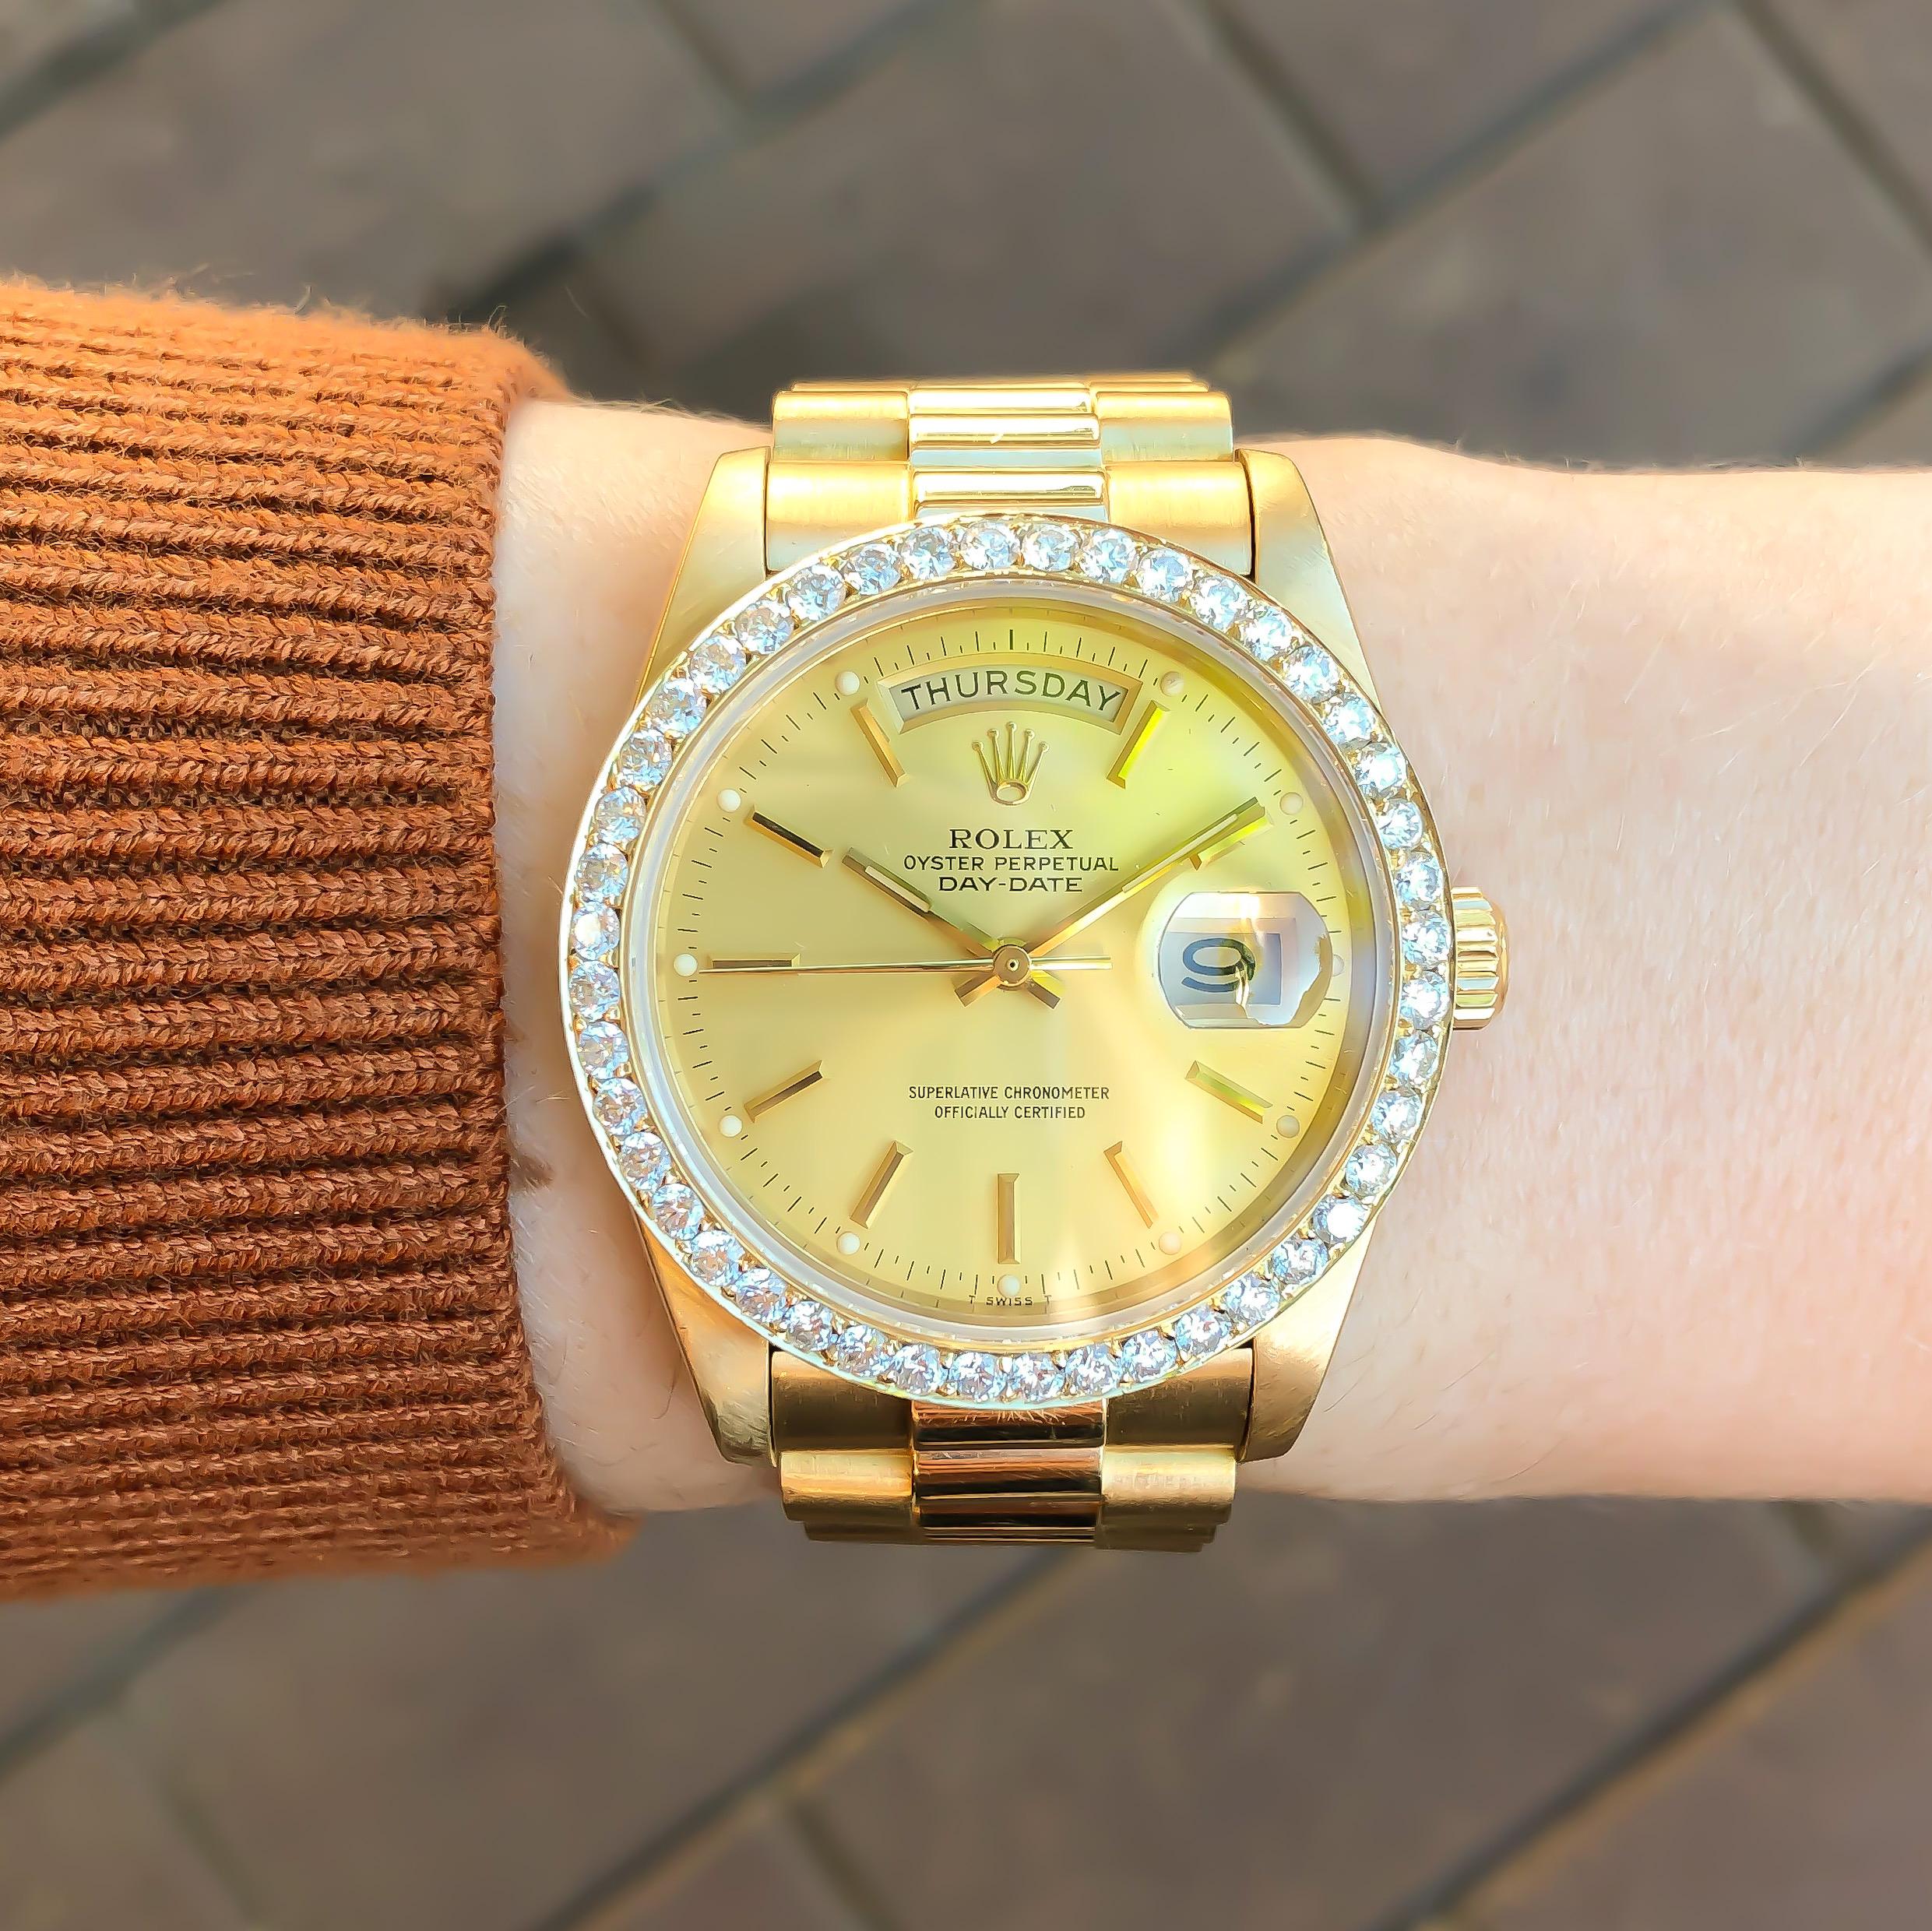 Rolex President Daydate Diamond Bezel 18K Yellow Gold #18038 1983 2.20CTW

•MODEL NO: 18038
•SERIAL NO: 743****
•MOVEMENT: AUTOMATIC SELF WINDING
•CASE MATERIAL: 18 KARAT YELLOW GOLD
•CONDITION: EXCELLENT PRE-OWNED
•CASE MEASUREMENTS: 36MM X 44MM X